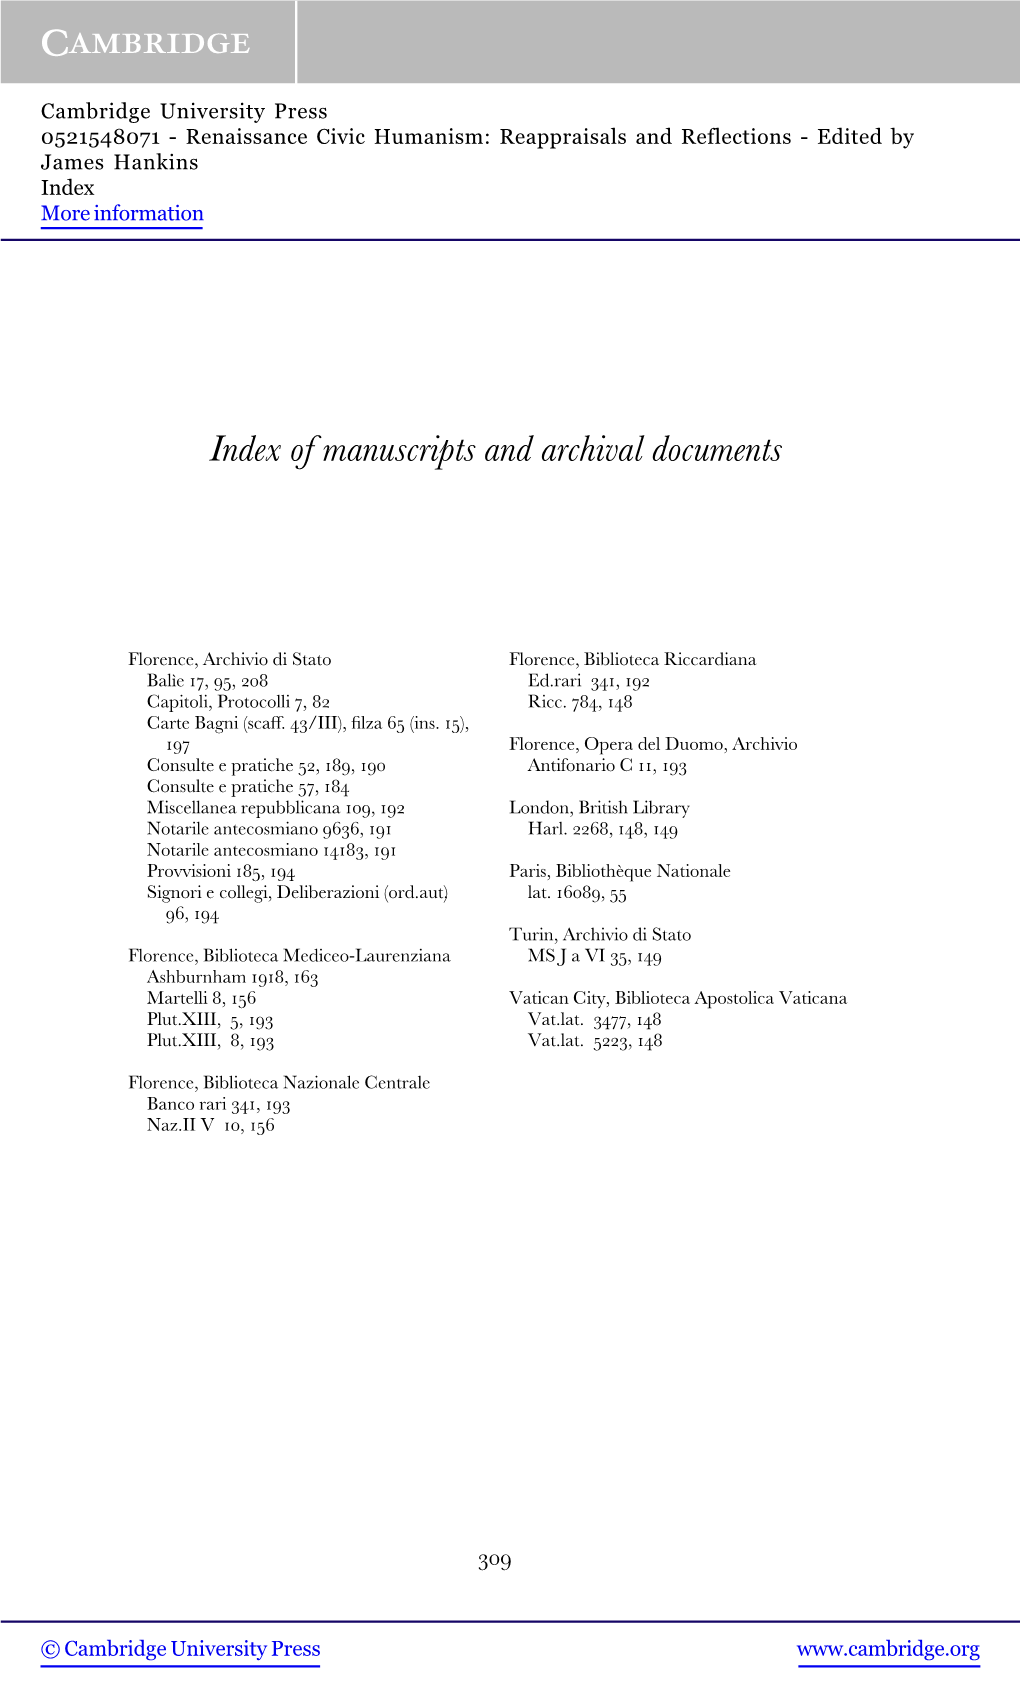 Index of Manuscripts and Archival Documents